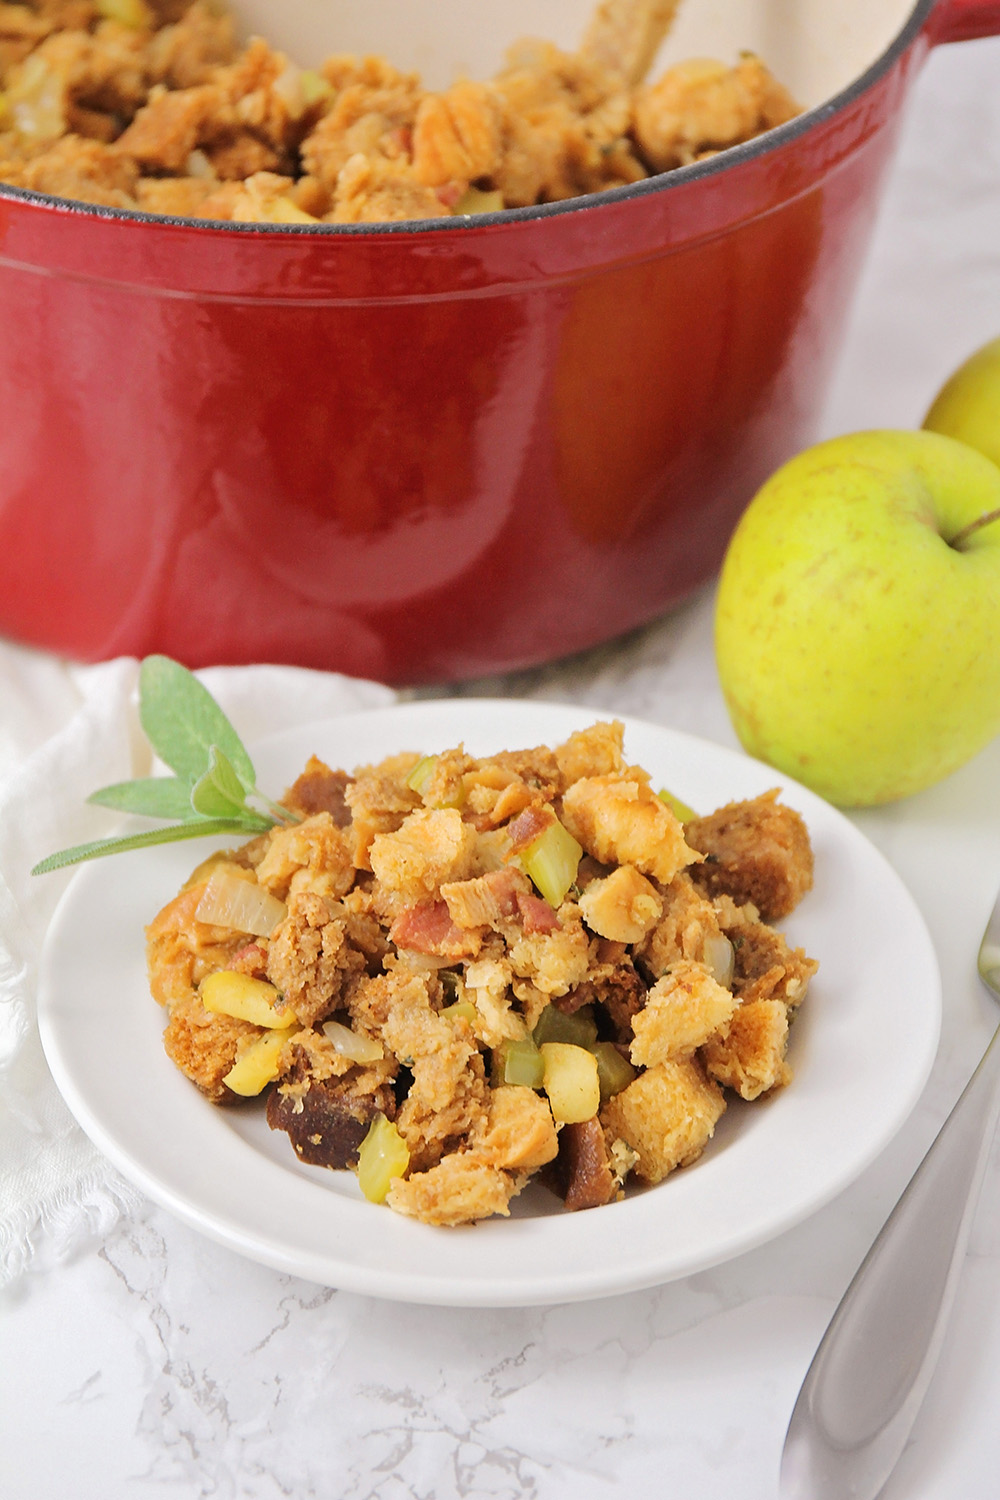 This bacon apple stovetop stuffing is the perfect addition to your Thanksgiving table! It's so flavorful, and so easy to make!